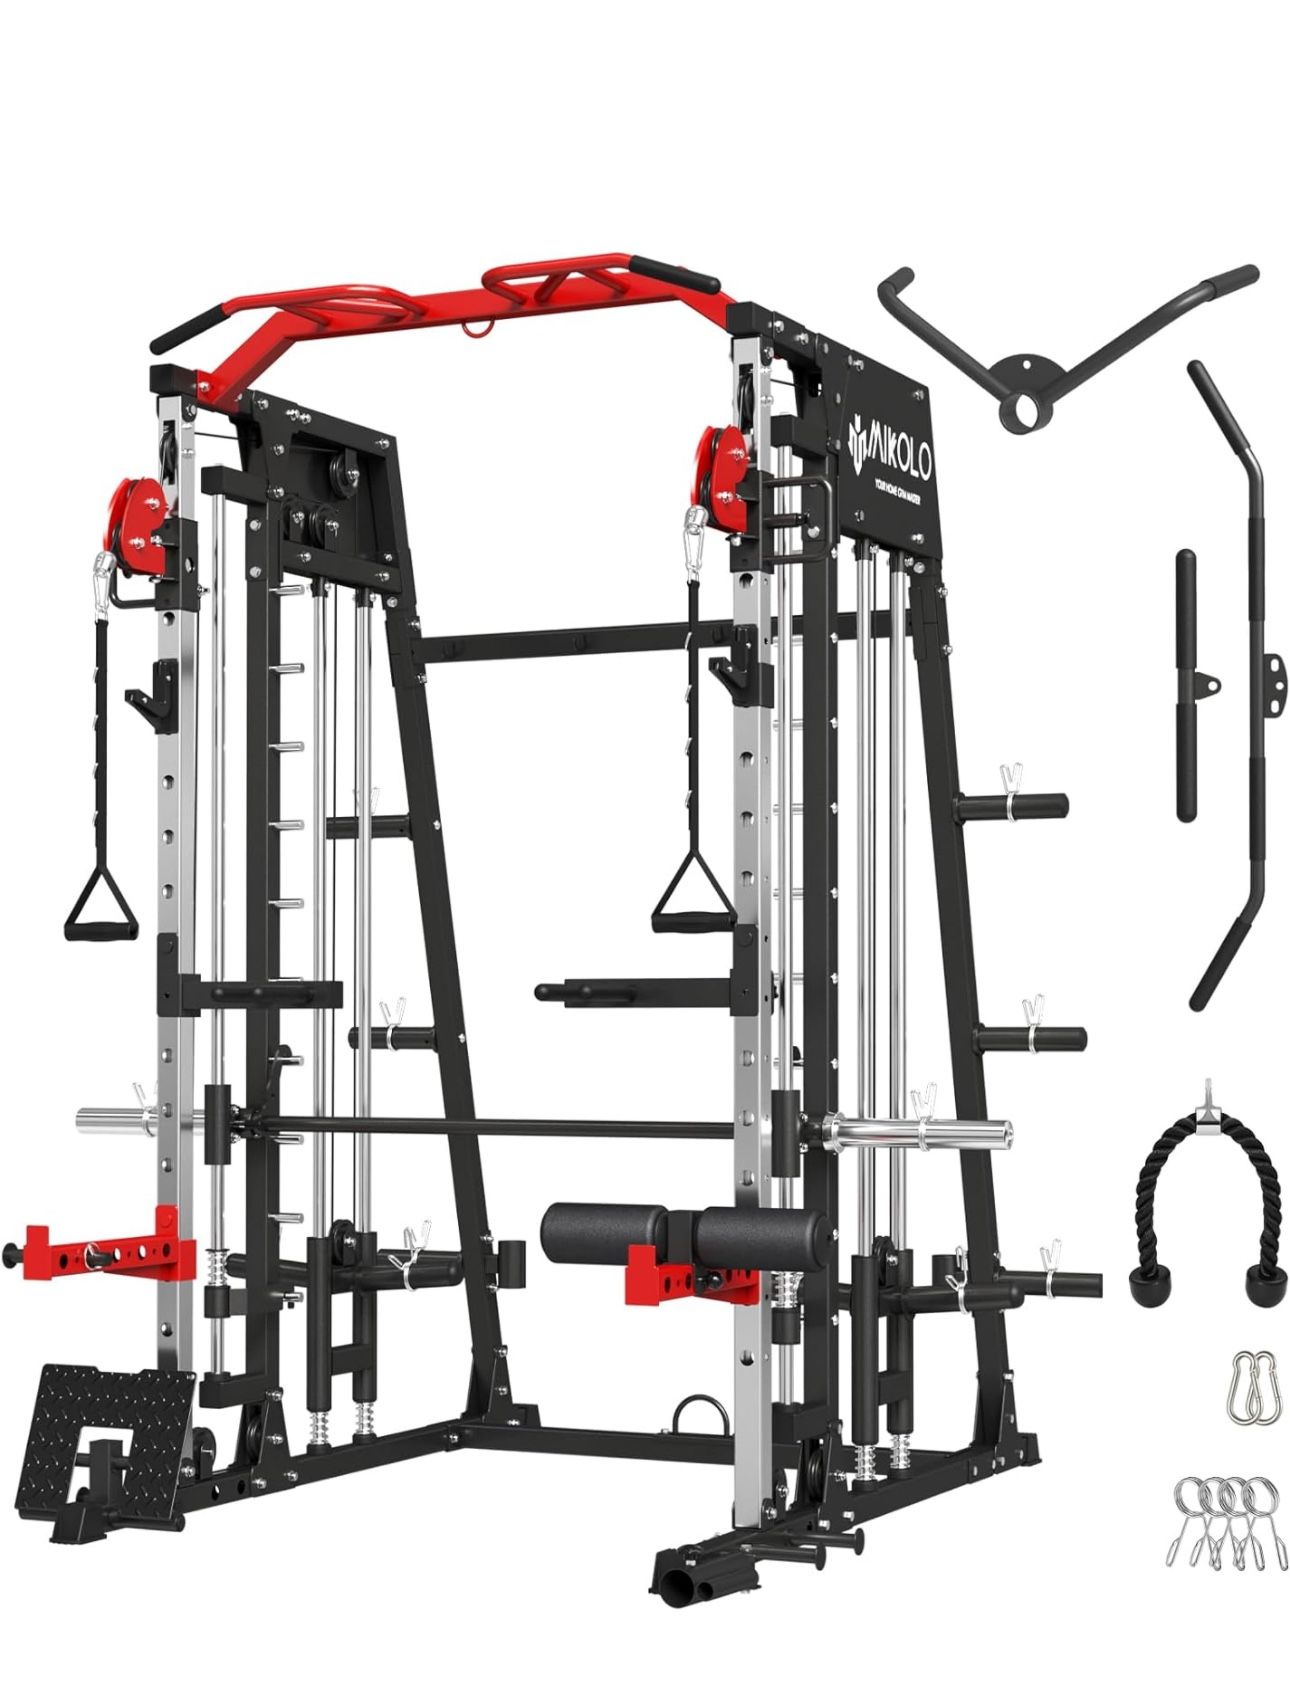 Mikolo Smith Machine, 2200lbs Squat Rack with LAT-Pull Down System & Cable Crossover Machine, Training Equipment with Leg Hold-Down Attachment